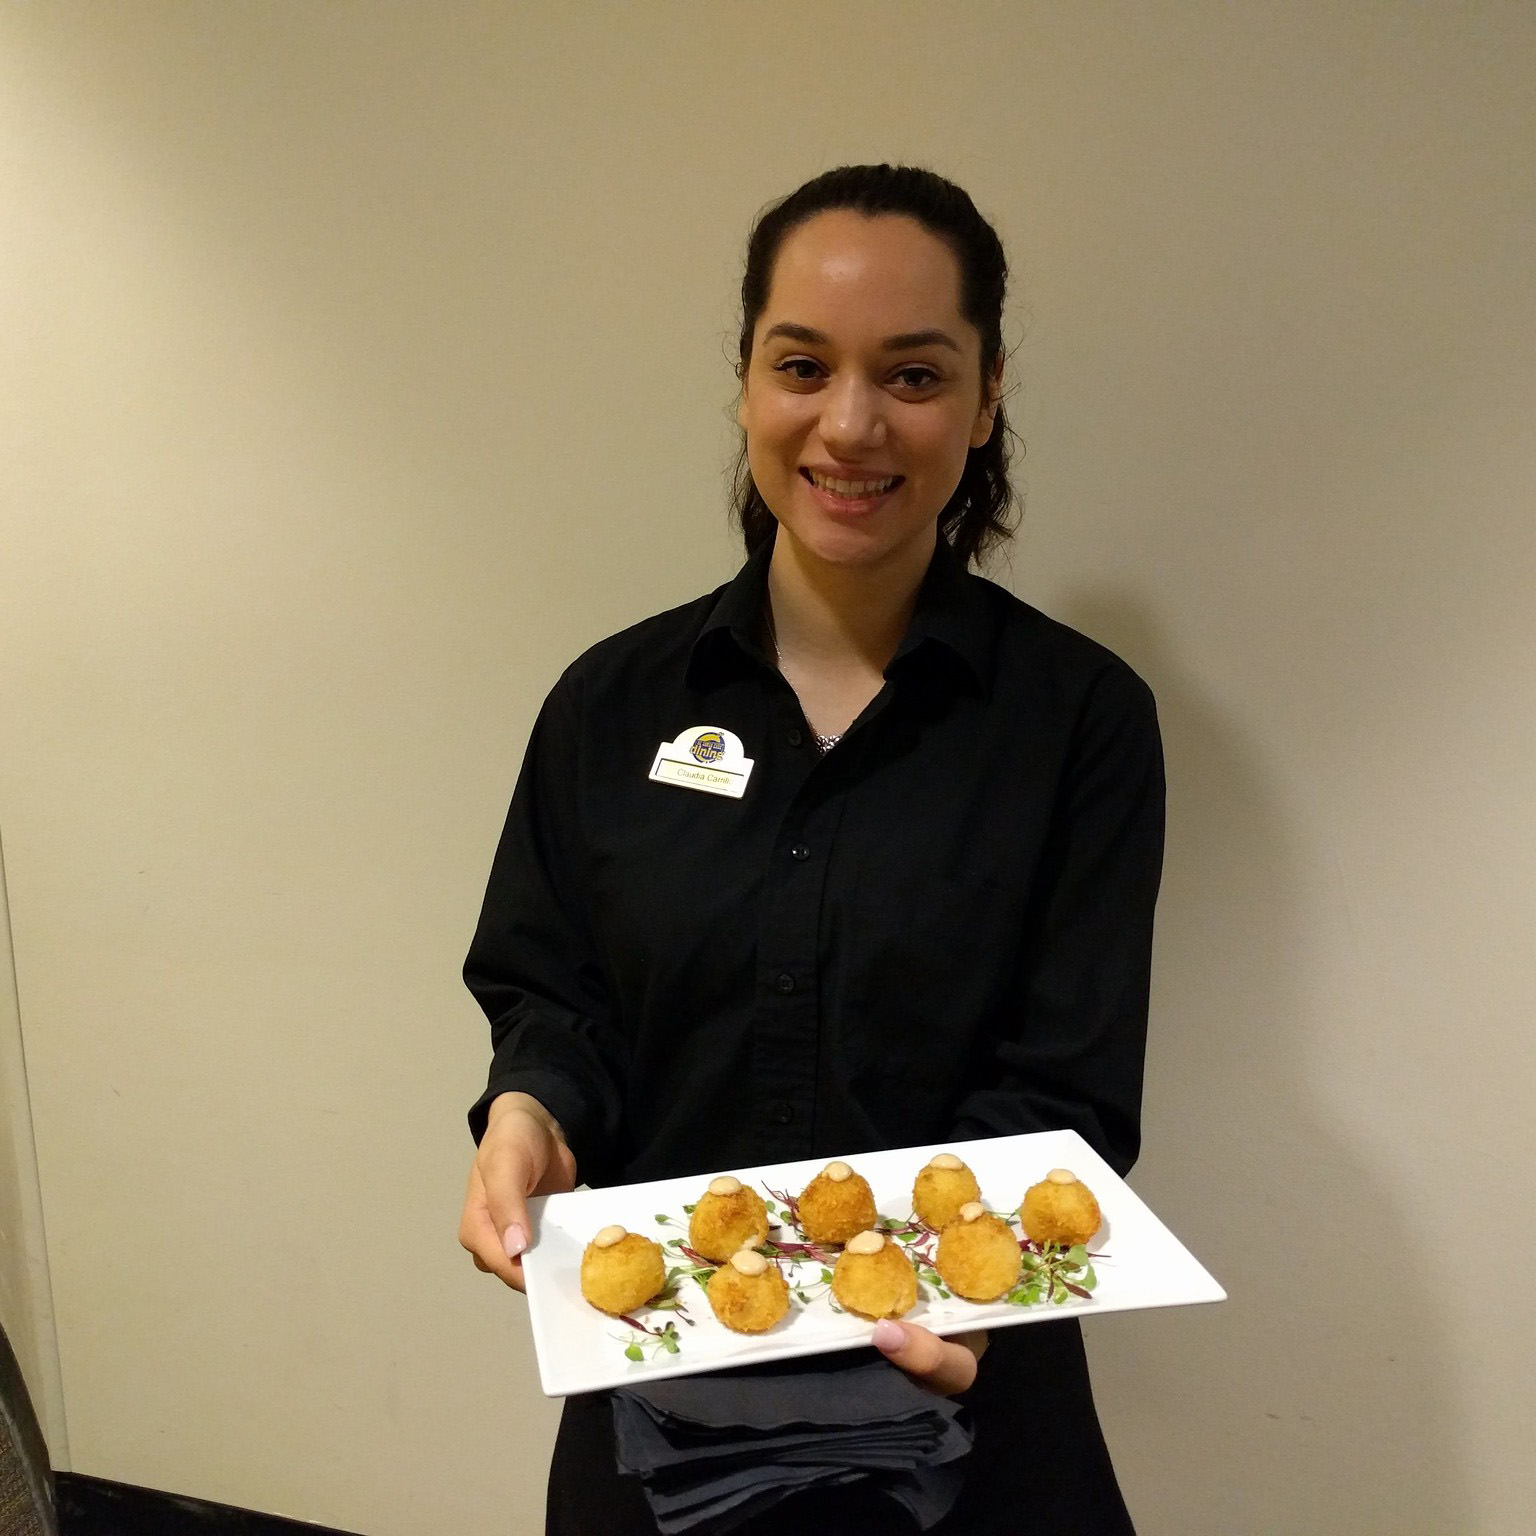 Catering student employee